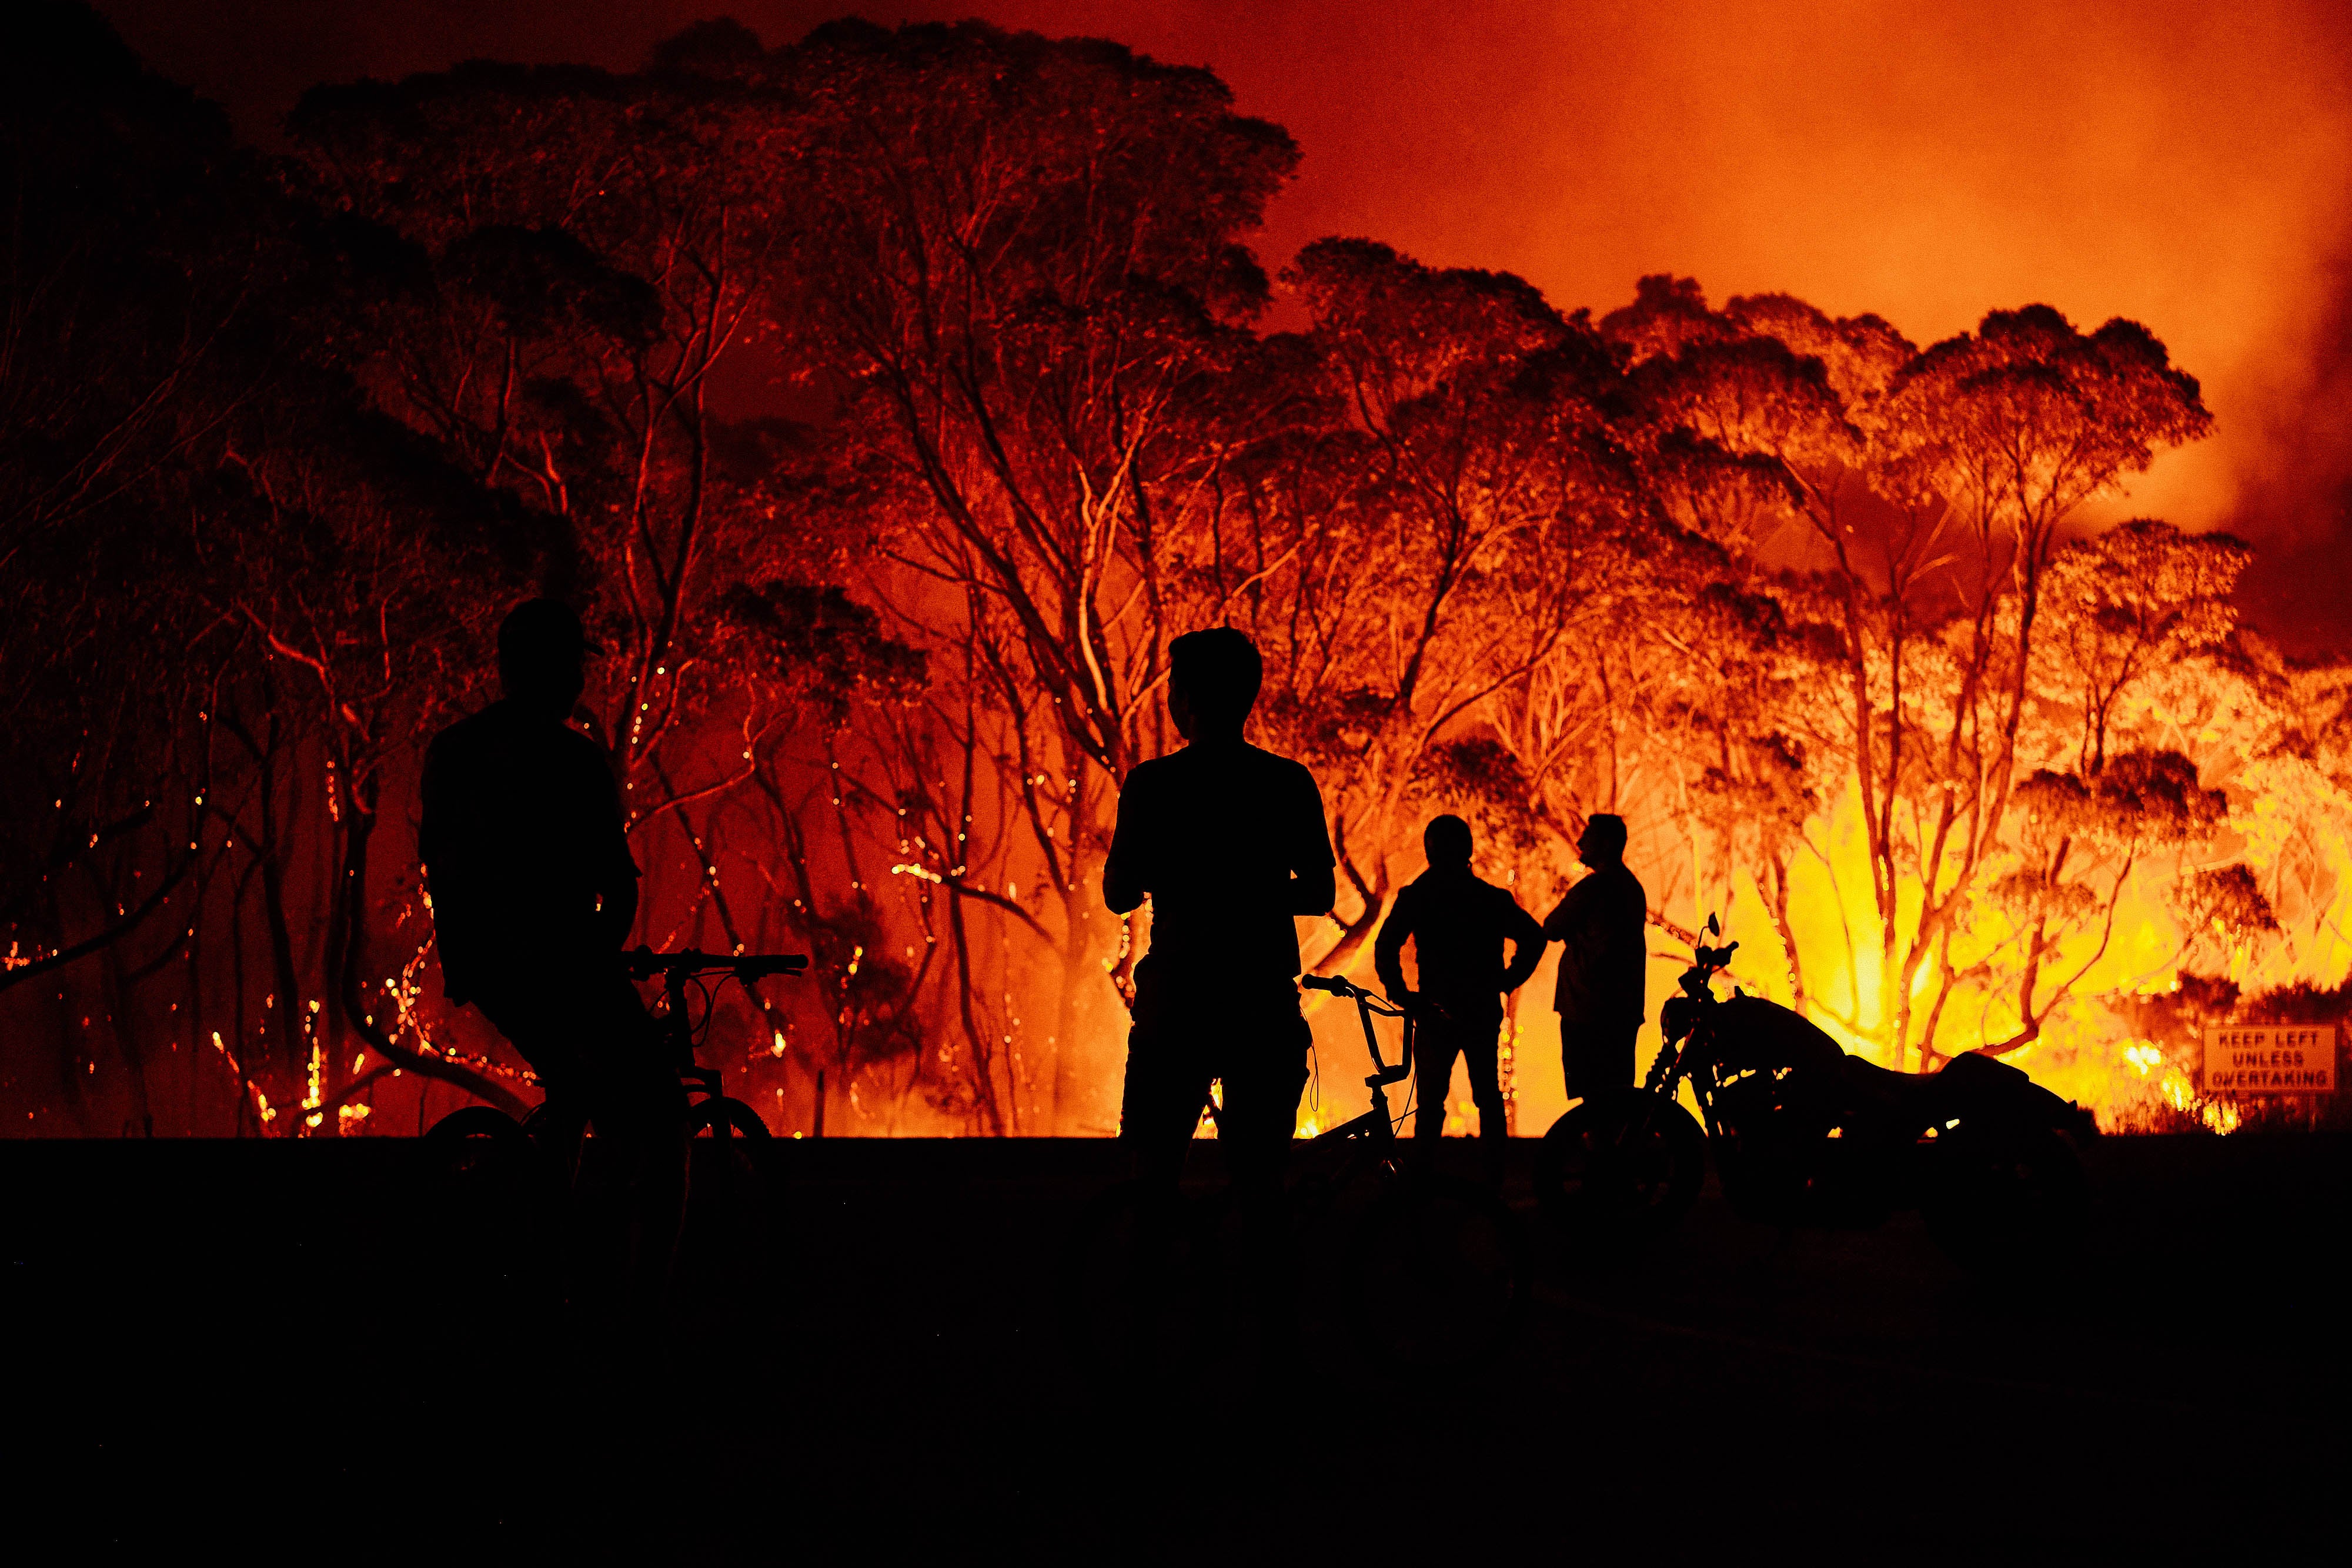 People look as fire burns through trees.